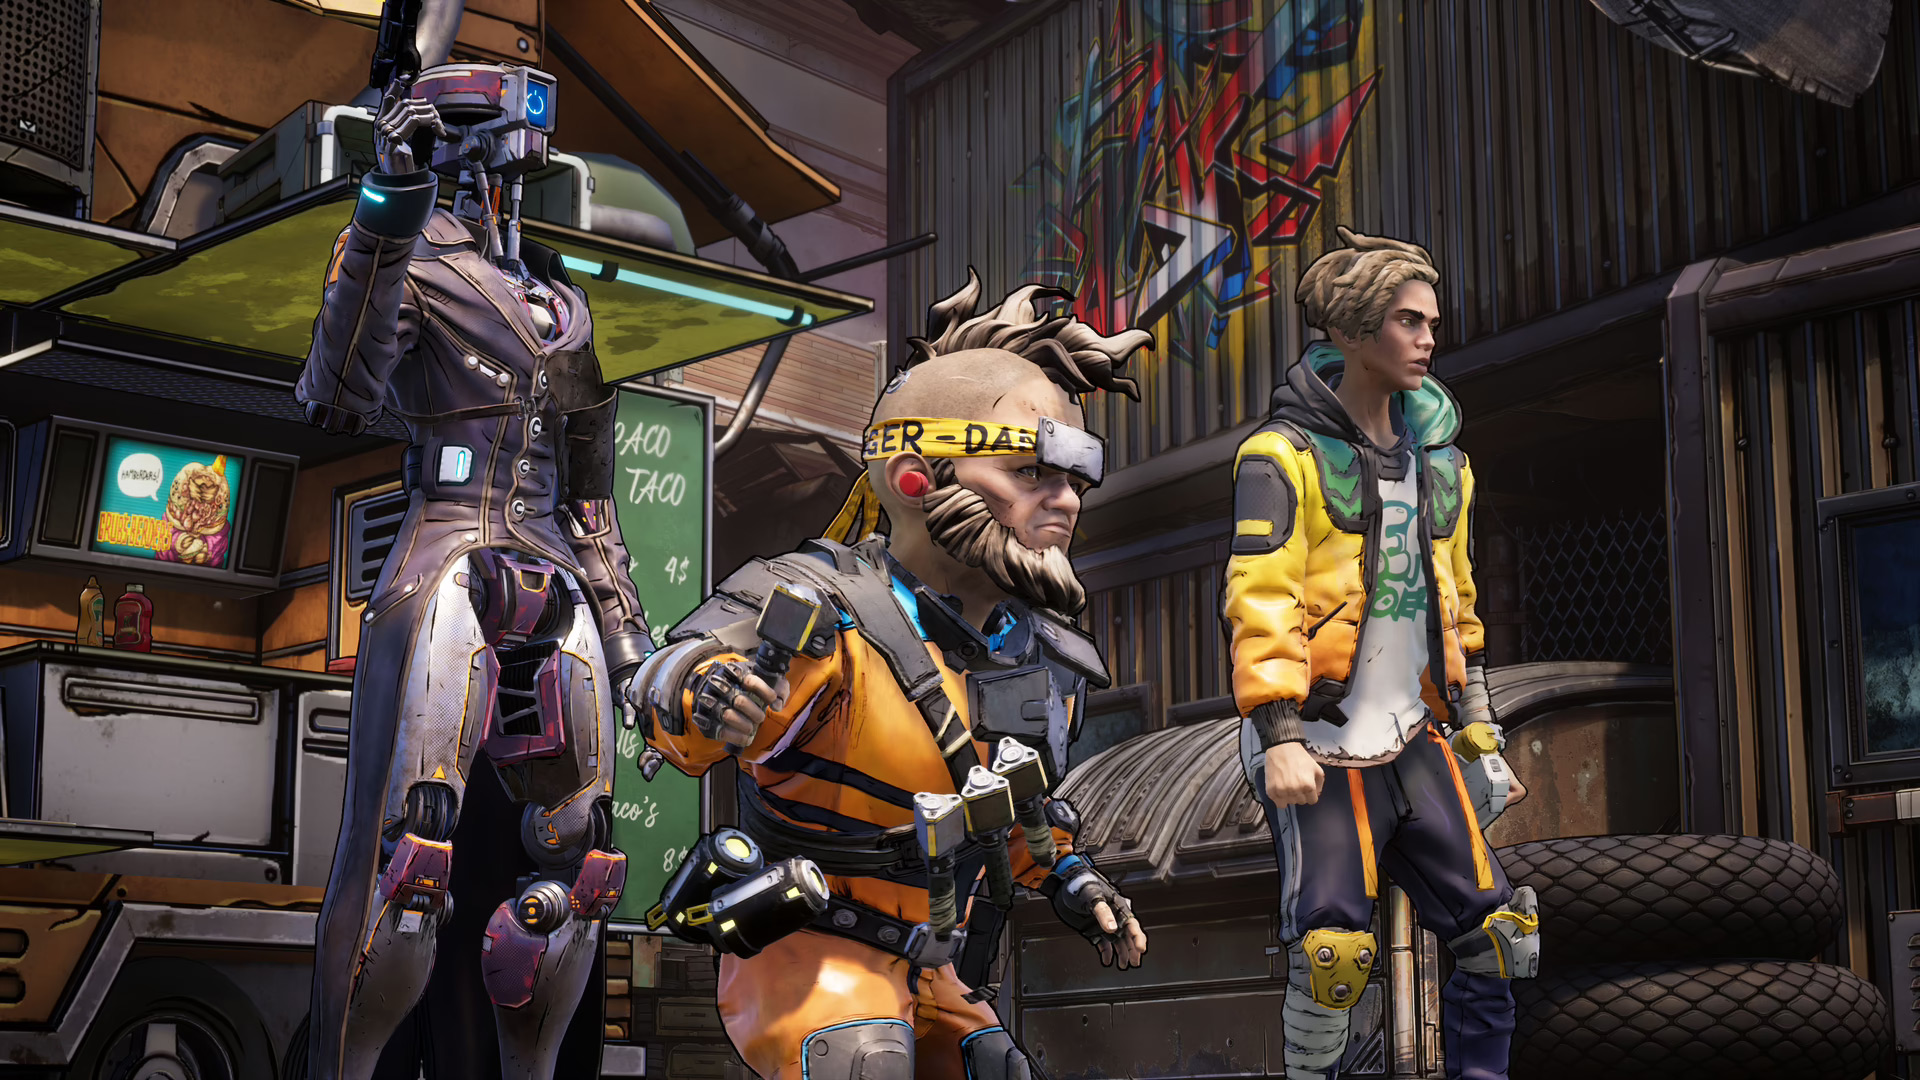 New Tales from the Borderlands Deluxe Edition includes the original Tales from the Borderlands